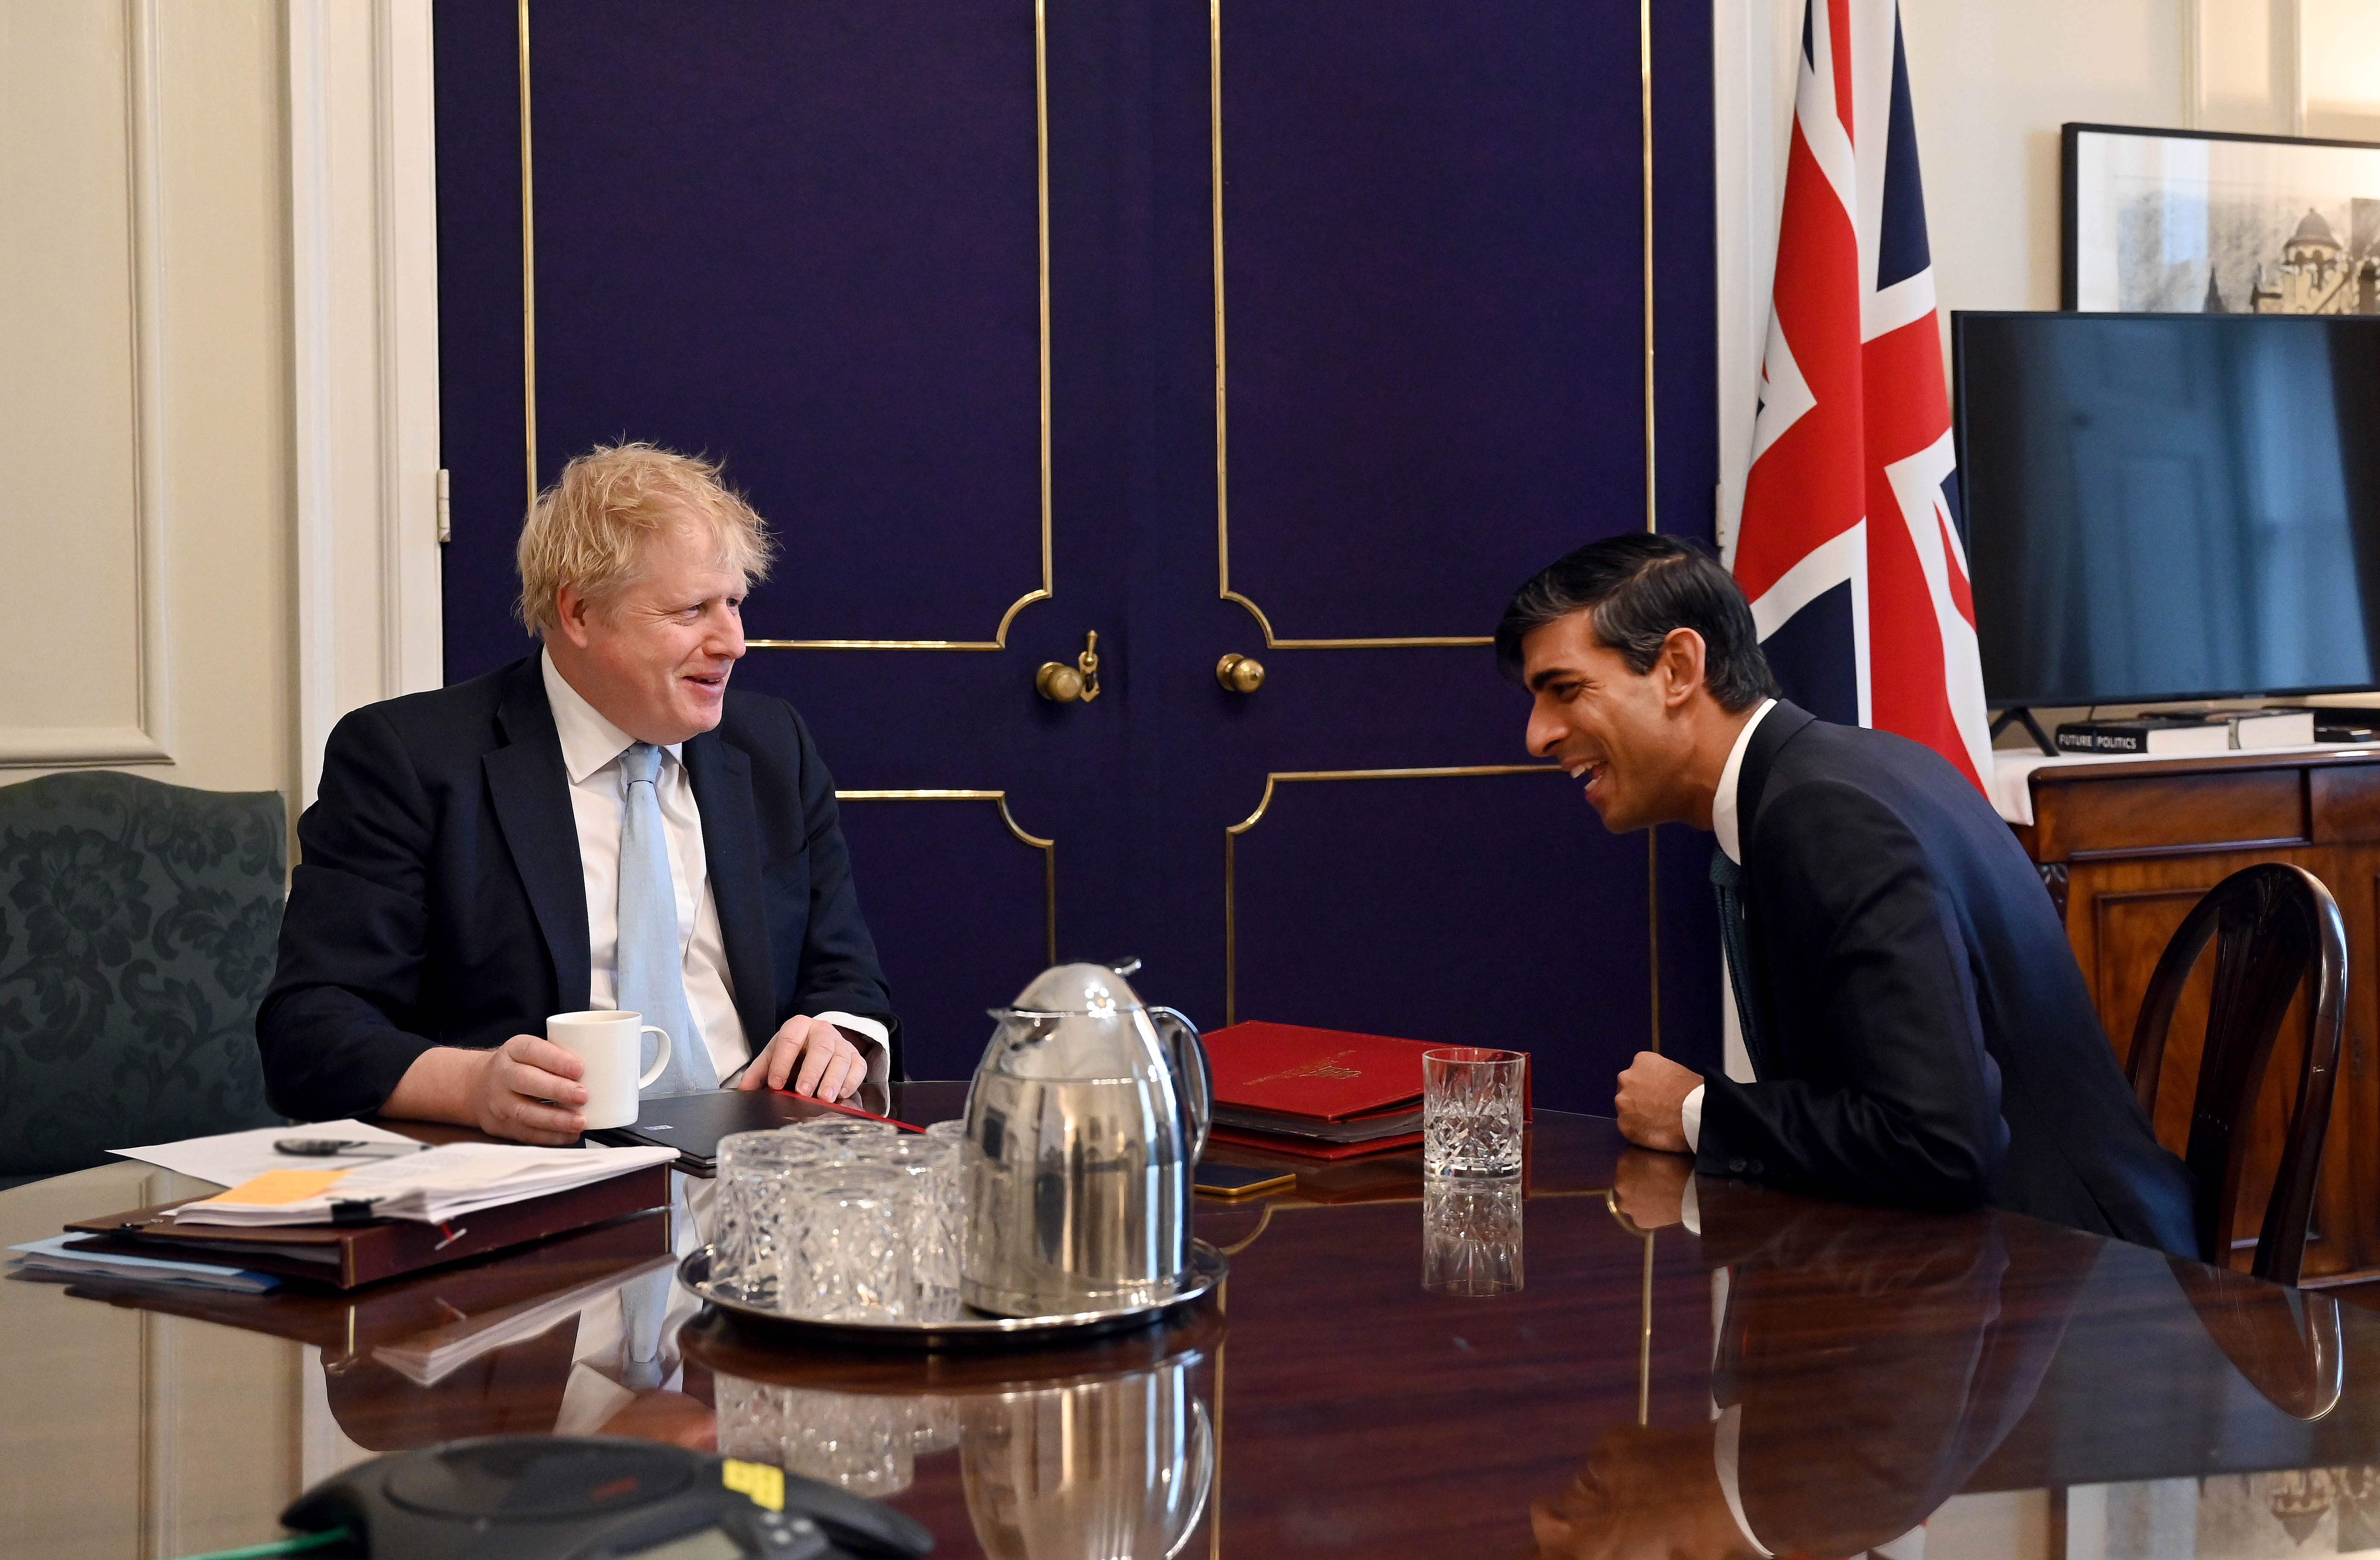 Then-Prime Minister Boris Johnson in a February 2020 photo with his, at the time, Chancellor of the Exchequer, Rishi Sunak.